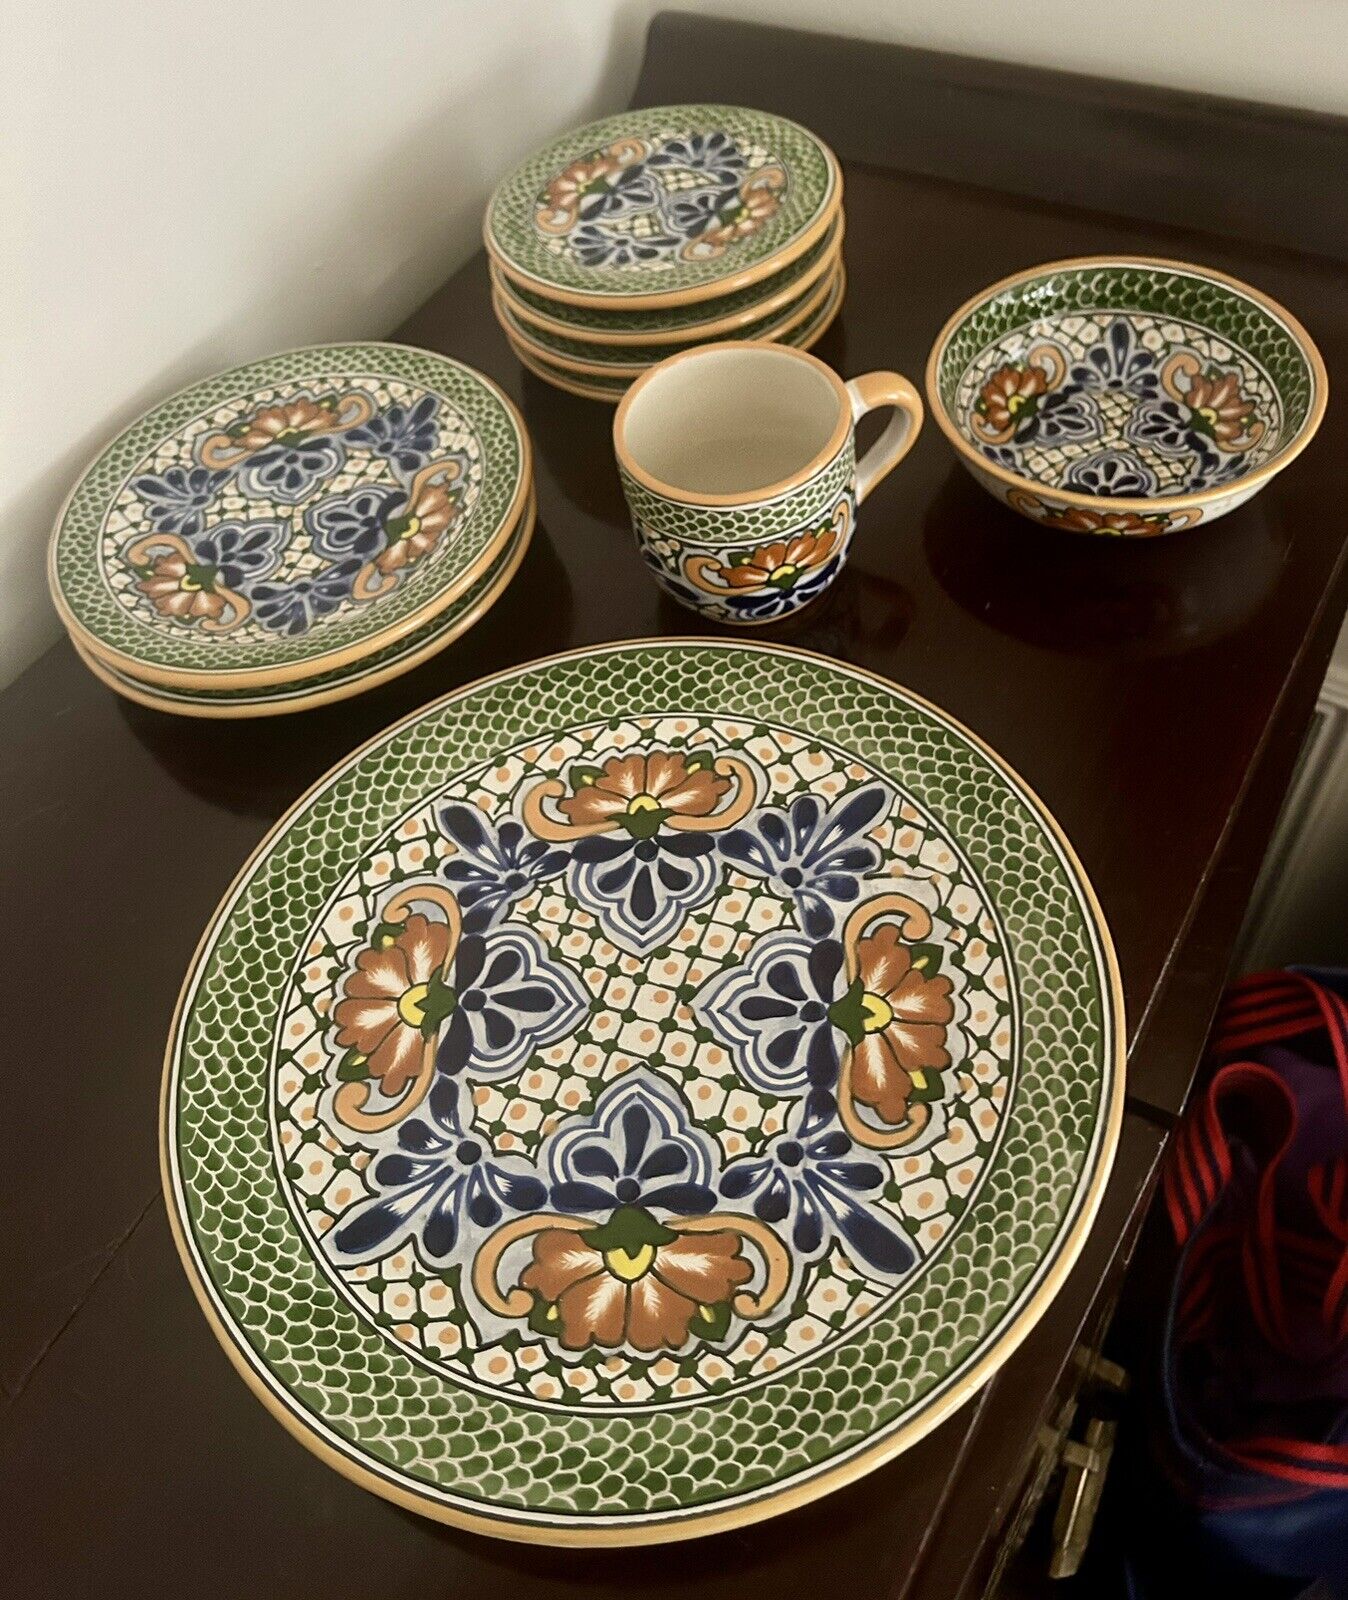 9 pc Talavera Mexican Pottery Dinnerware Set Plates Dishes Bowl & Cup Lot